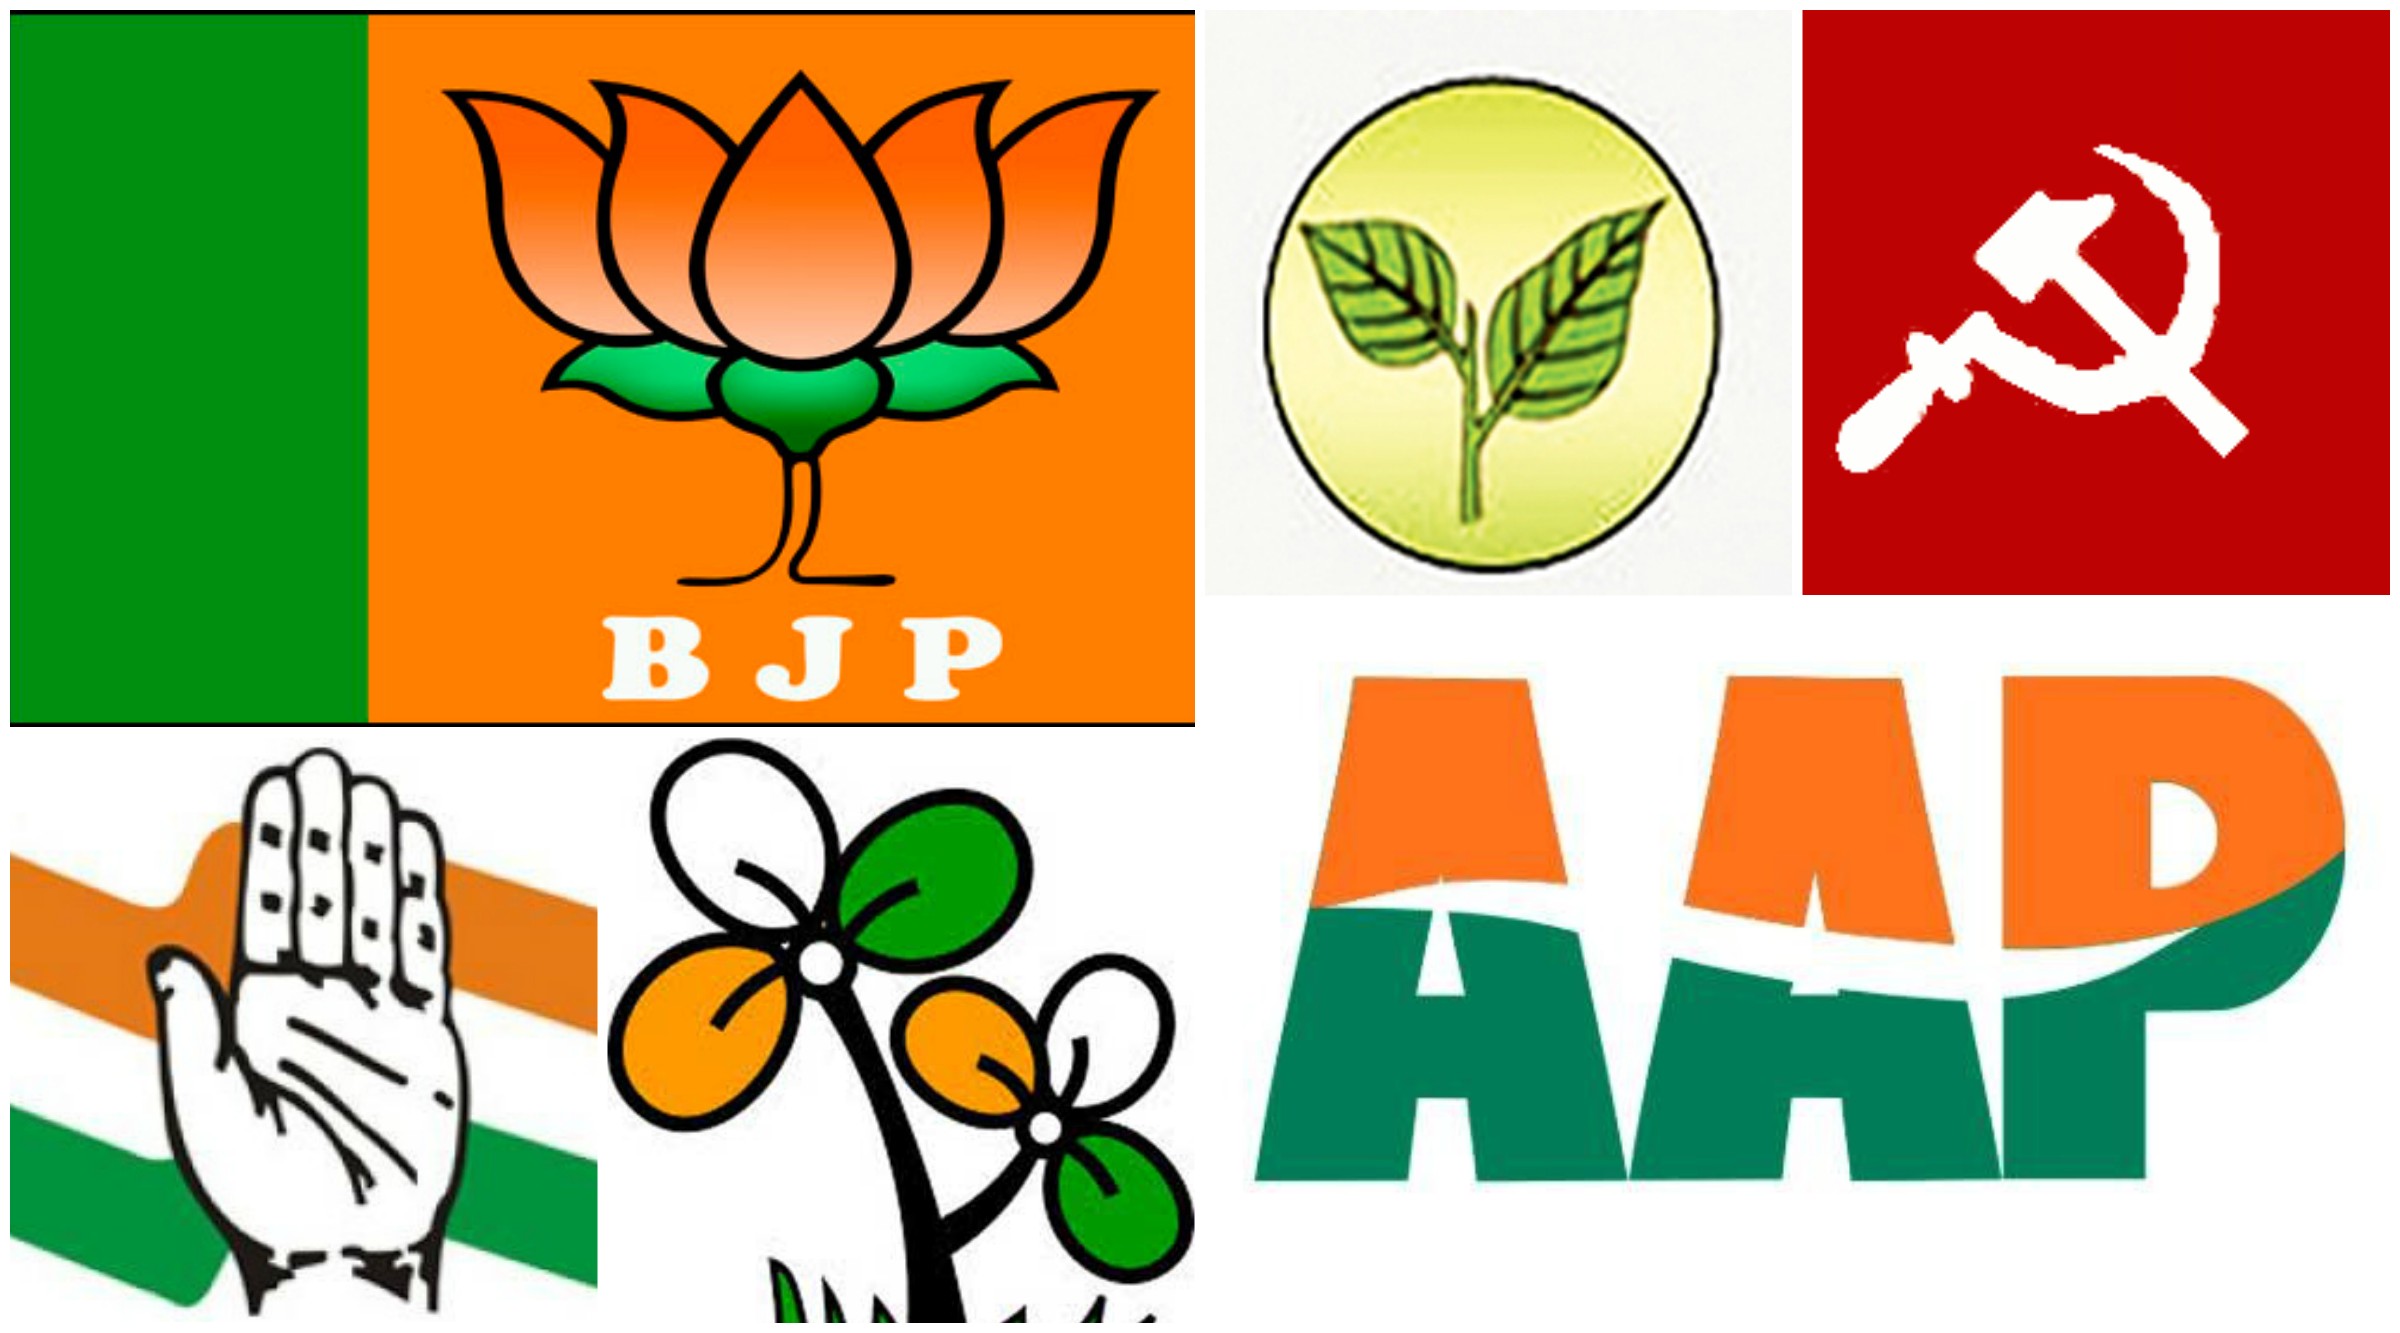 information about Indian political parties